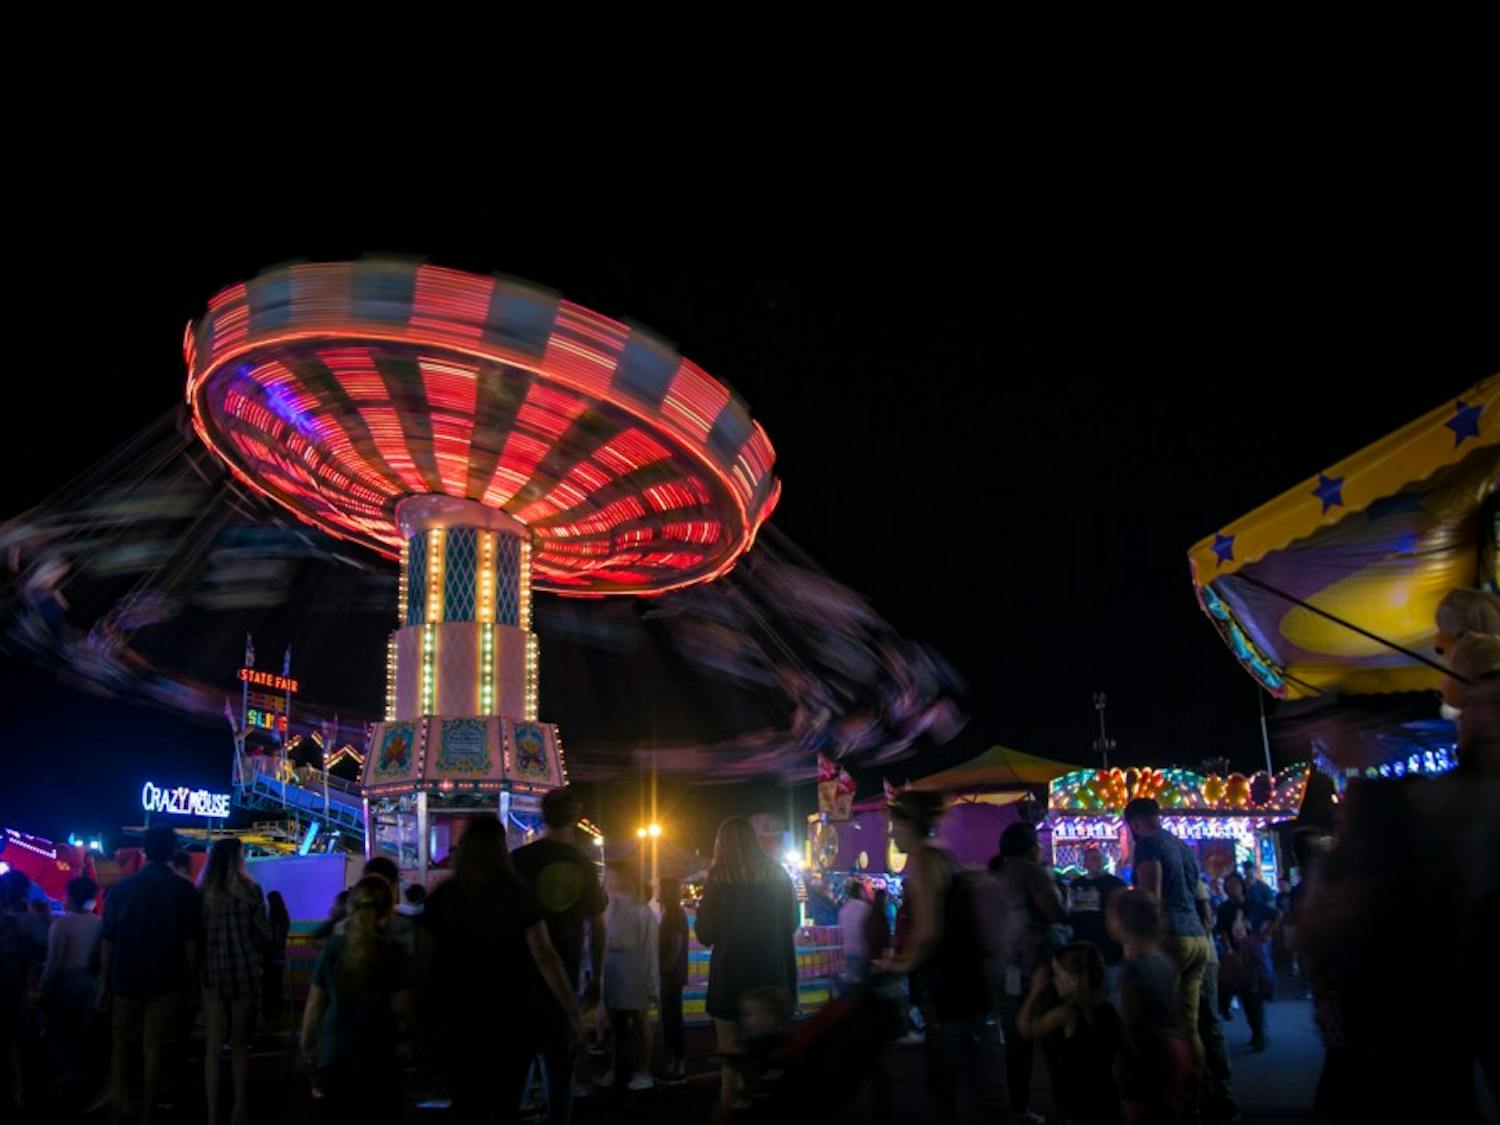 A long exposure of chair swing ride at the state fair.